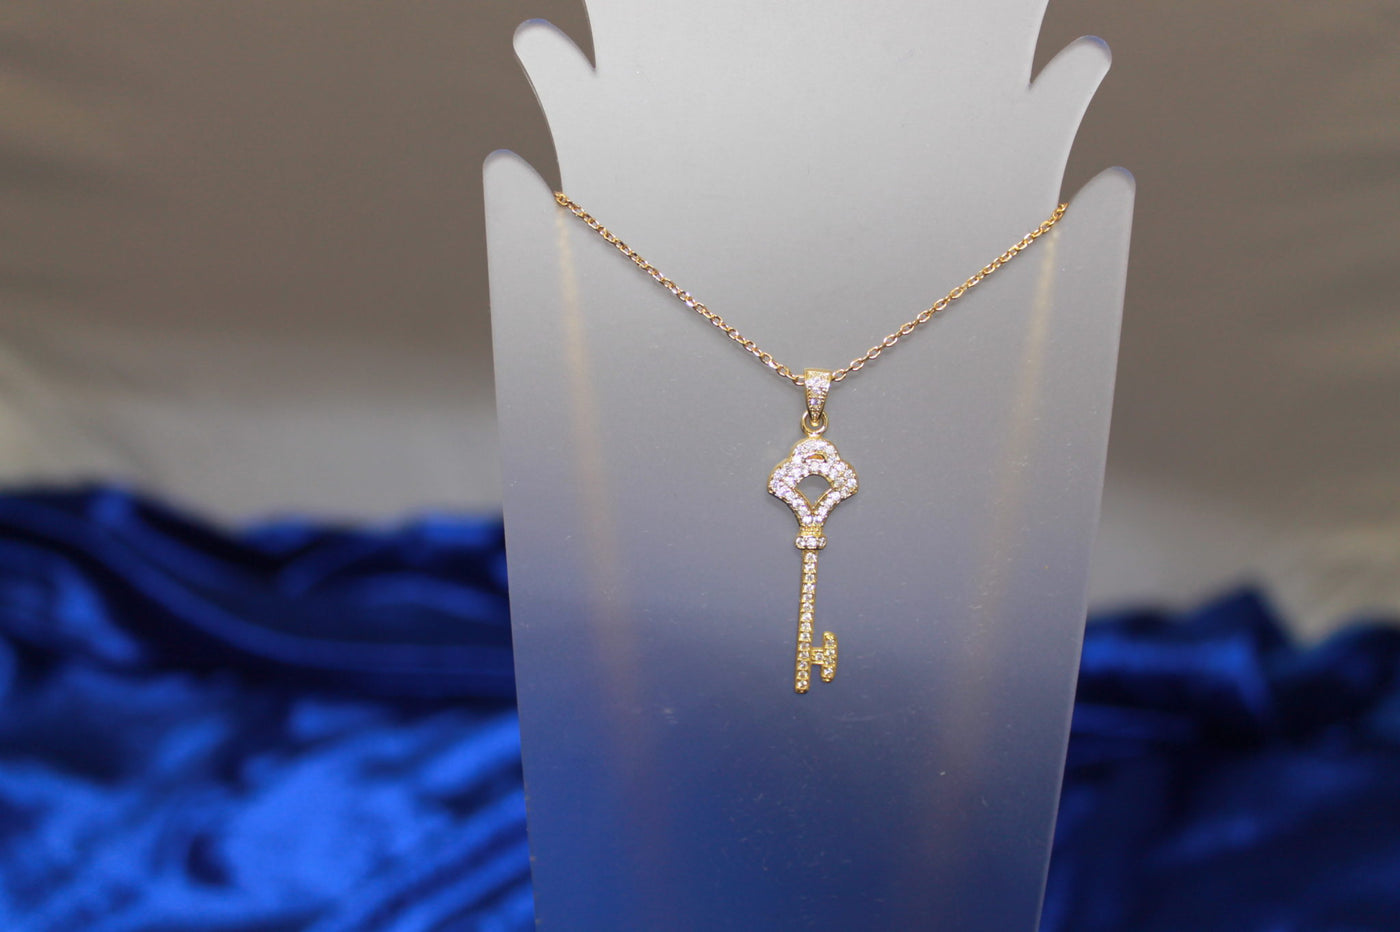 Pave Set Cubic ZirconiaPave Set Cubic Zirconia Dainty Key Pendant Necklace in Yellow Gold Tone